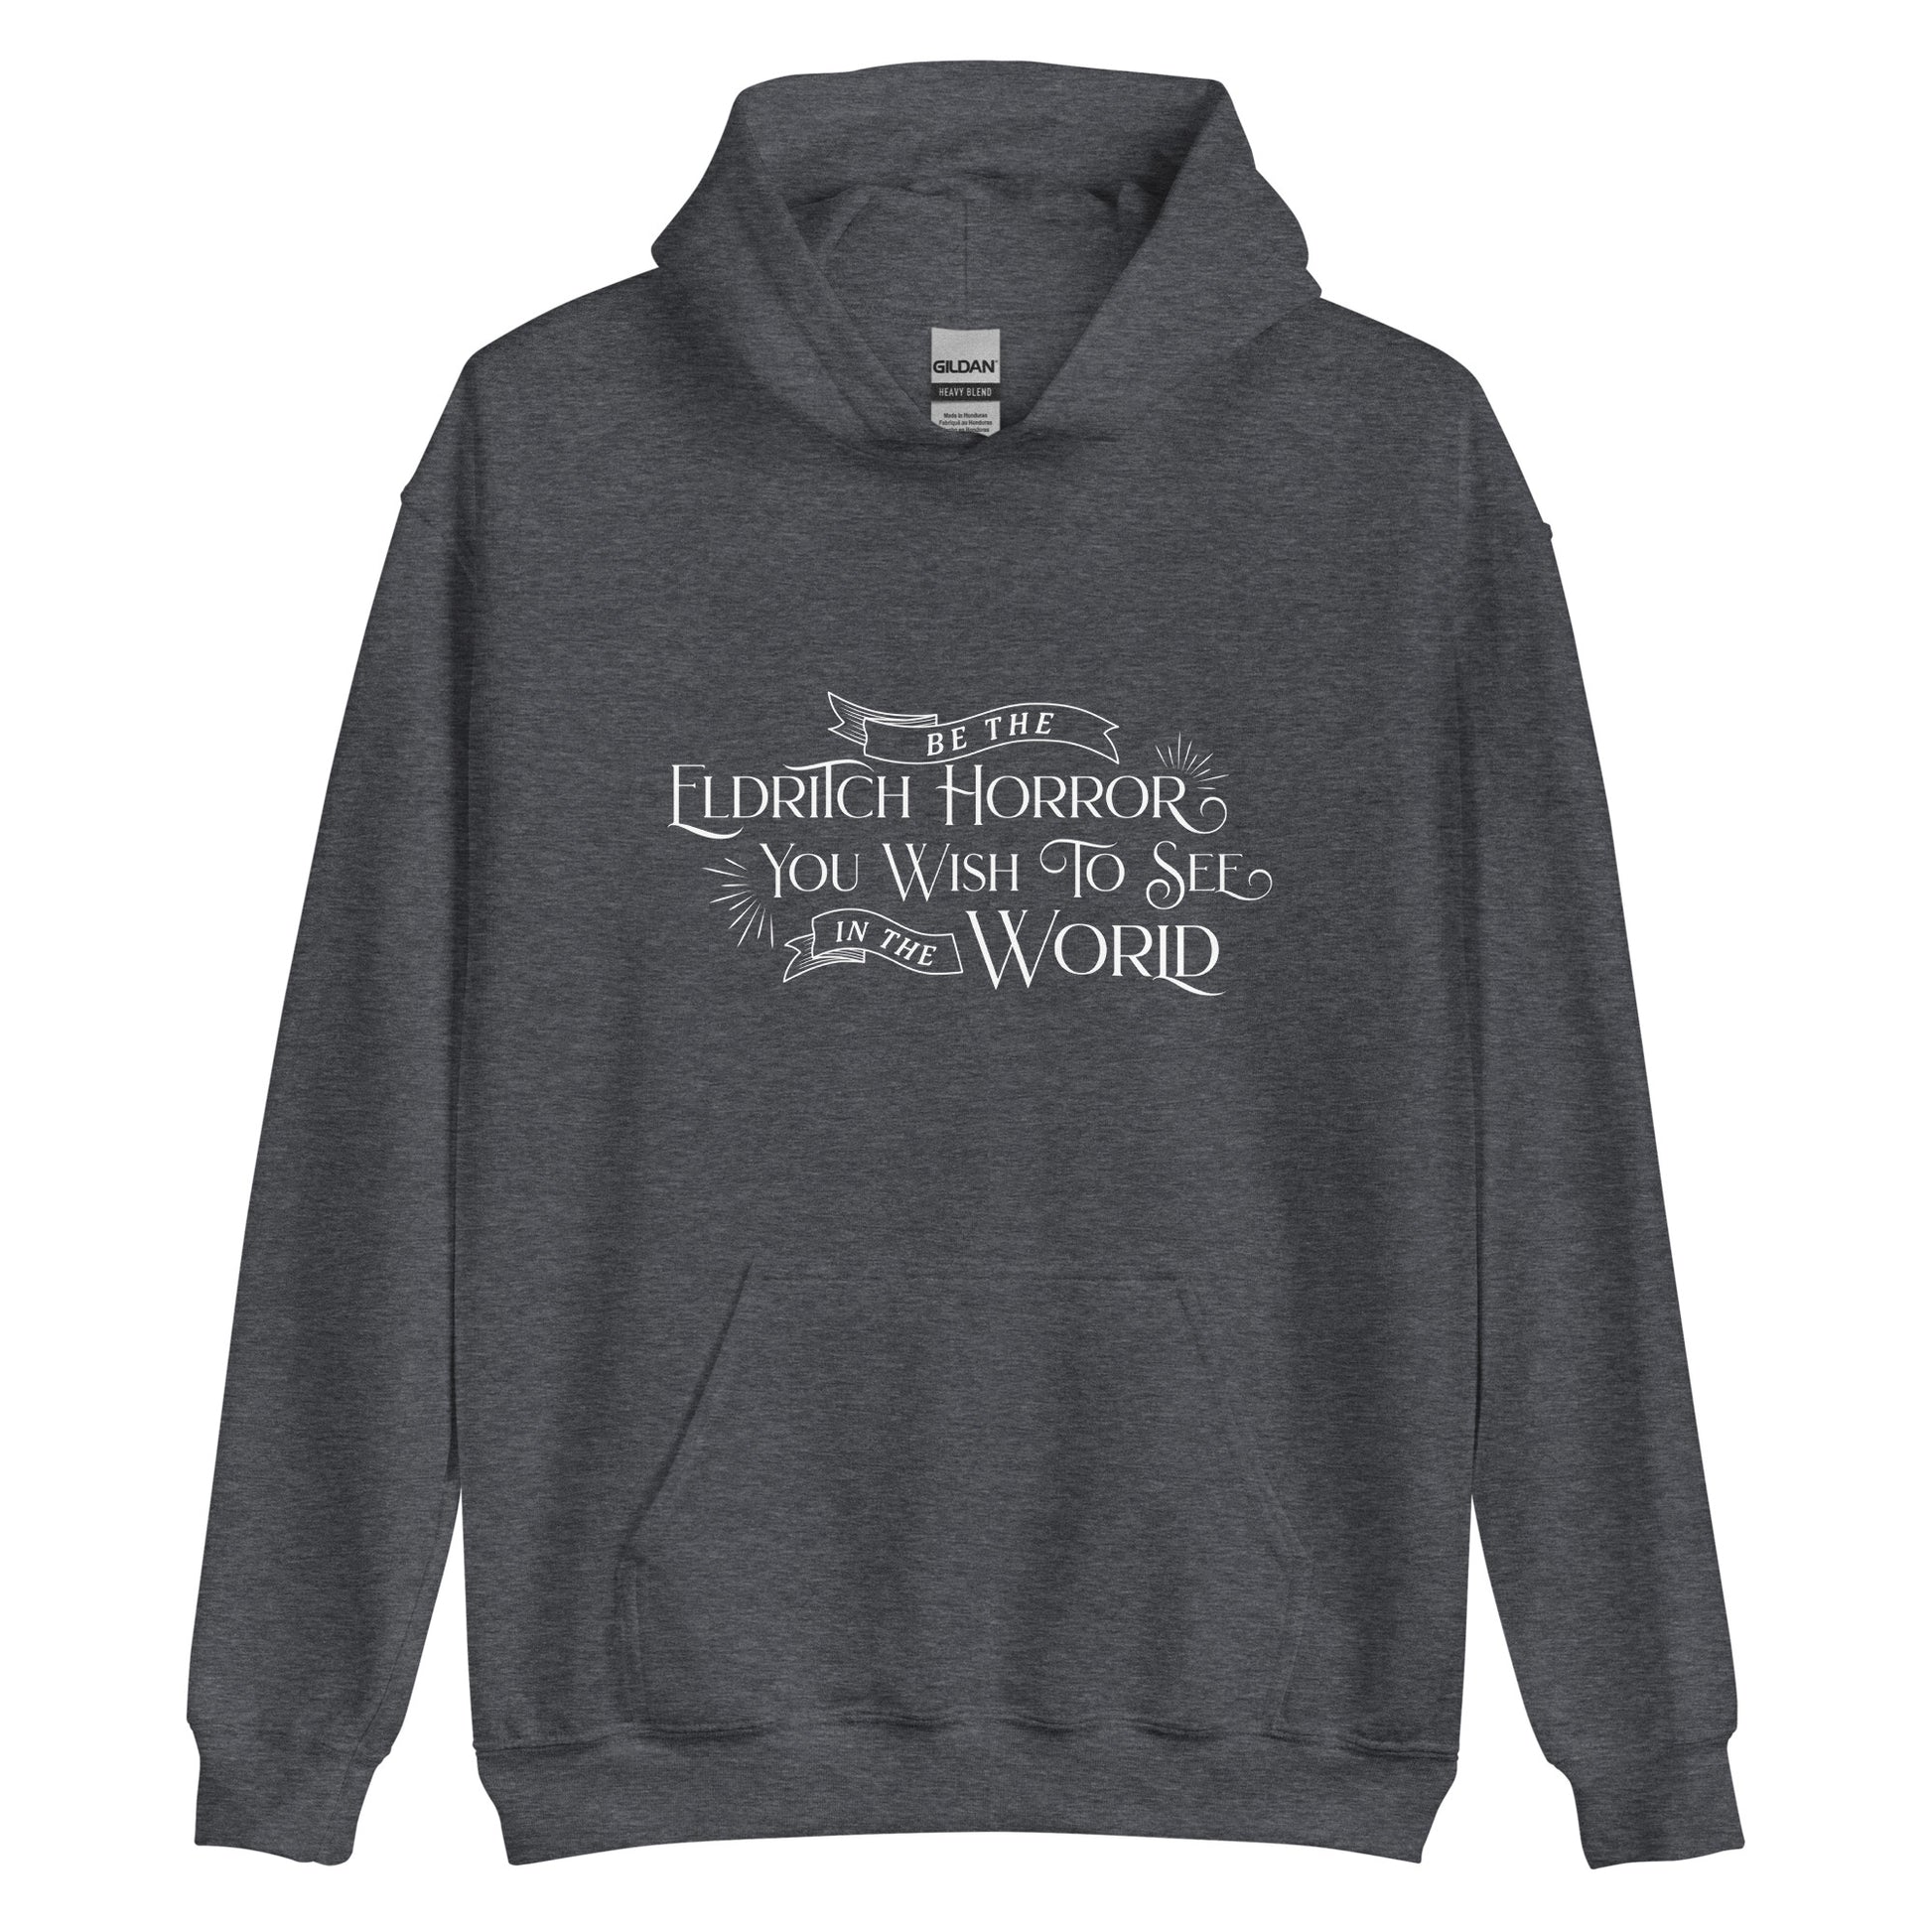 A dark heather grey hooded sweatshirt featuring white text in an old-fashioned style on the chest. The text reads "Be the Eldritch Horror You Wish To See In The World".